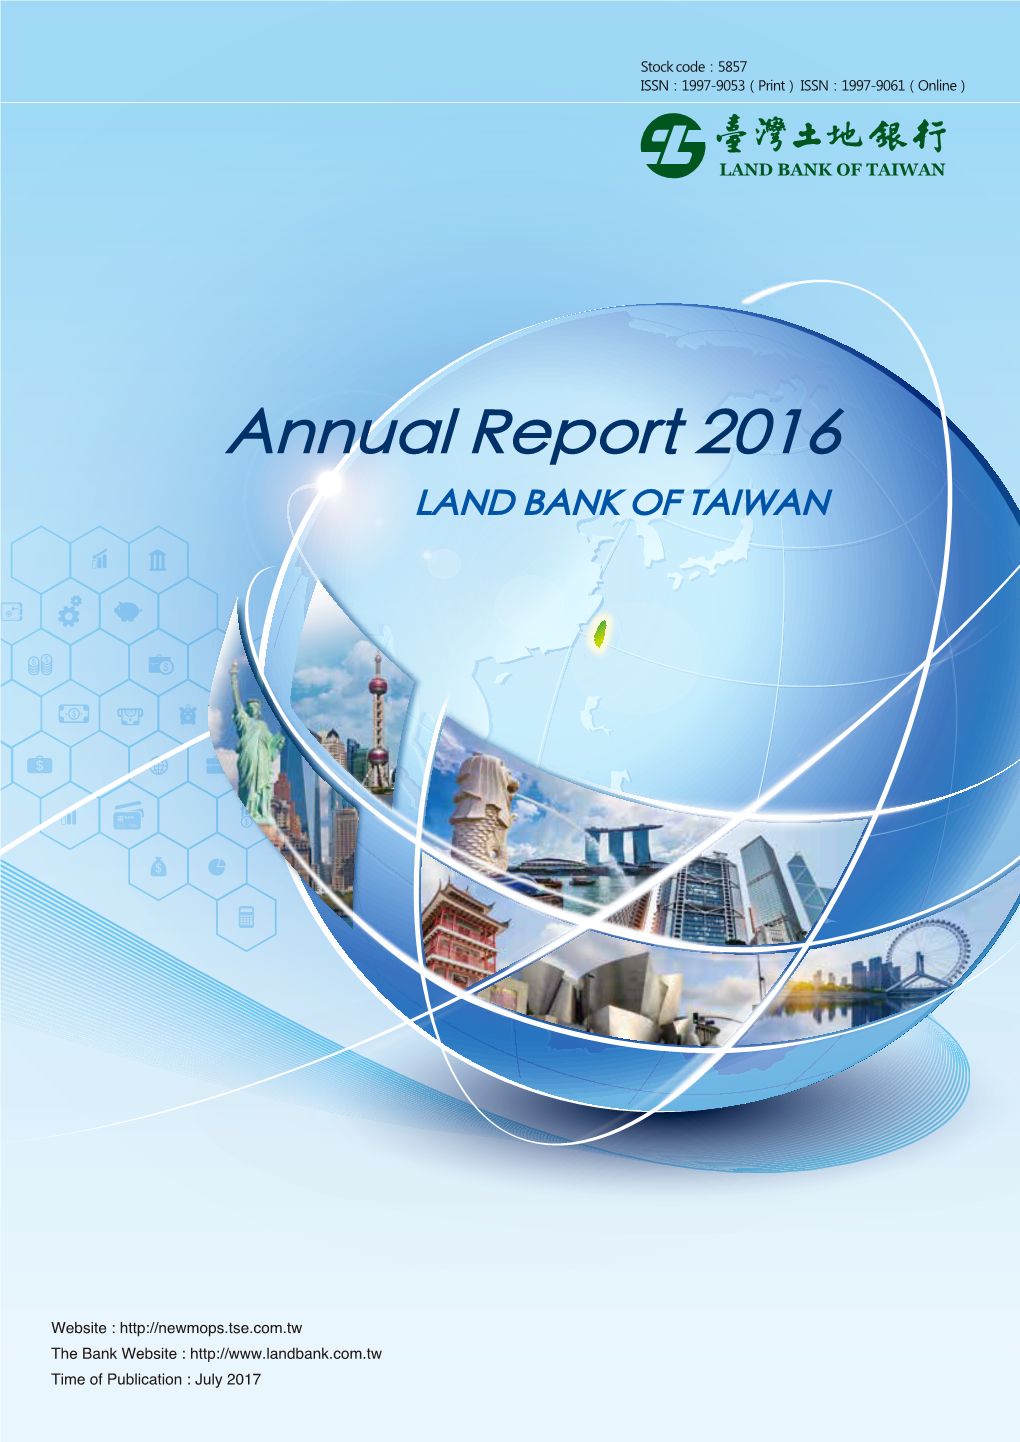 Annual Report 2016 LAND BANK of TAIWAN